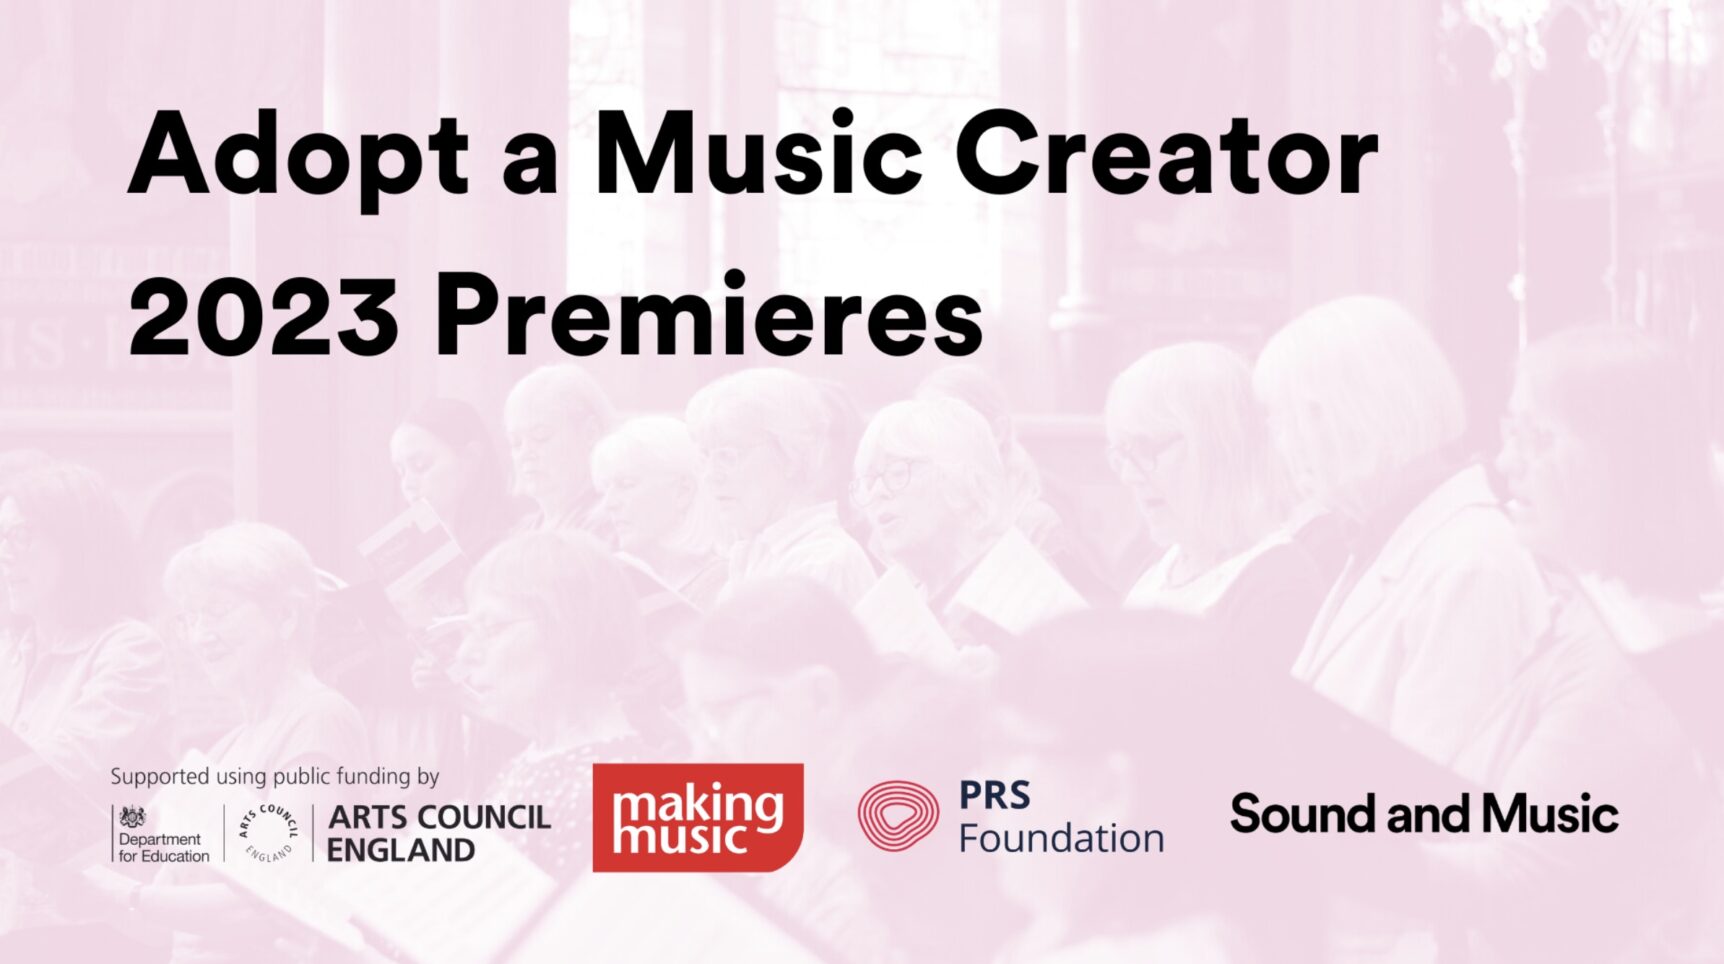 Black text reading ‘Adopt a Music Creator 2023 Premieres’ on top of a pink monochrome image of choir singers in the background. At the bottom are the Arts Council England Department for Education logo, the Making Music logo, the PRS Foundation logo and the Sound and Music logo.